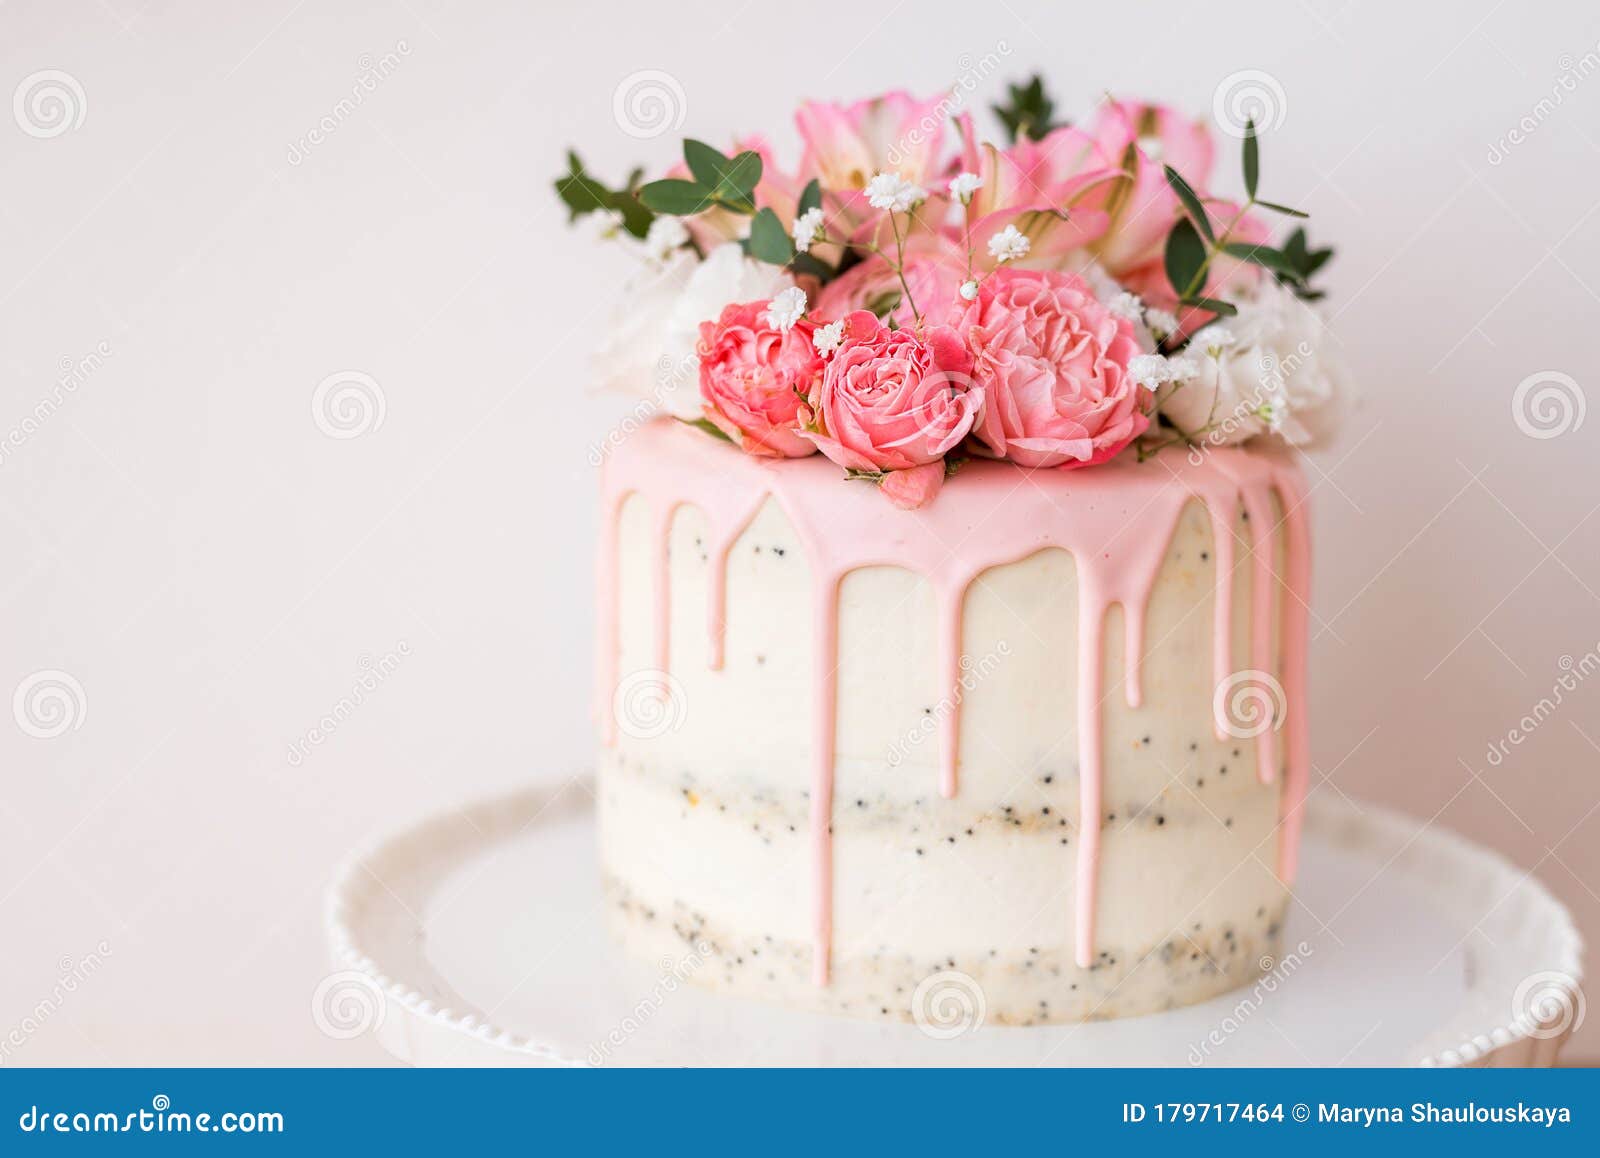 Beautiful Homemade Cake Decorated with Flowers . Pink Icing ...